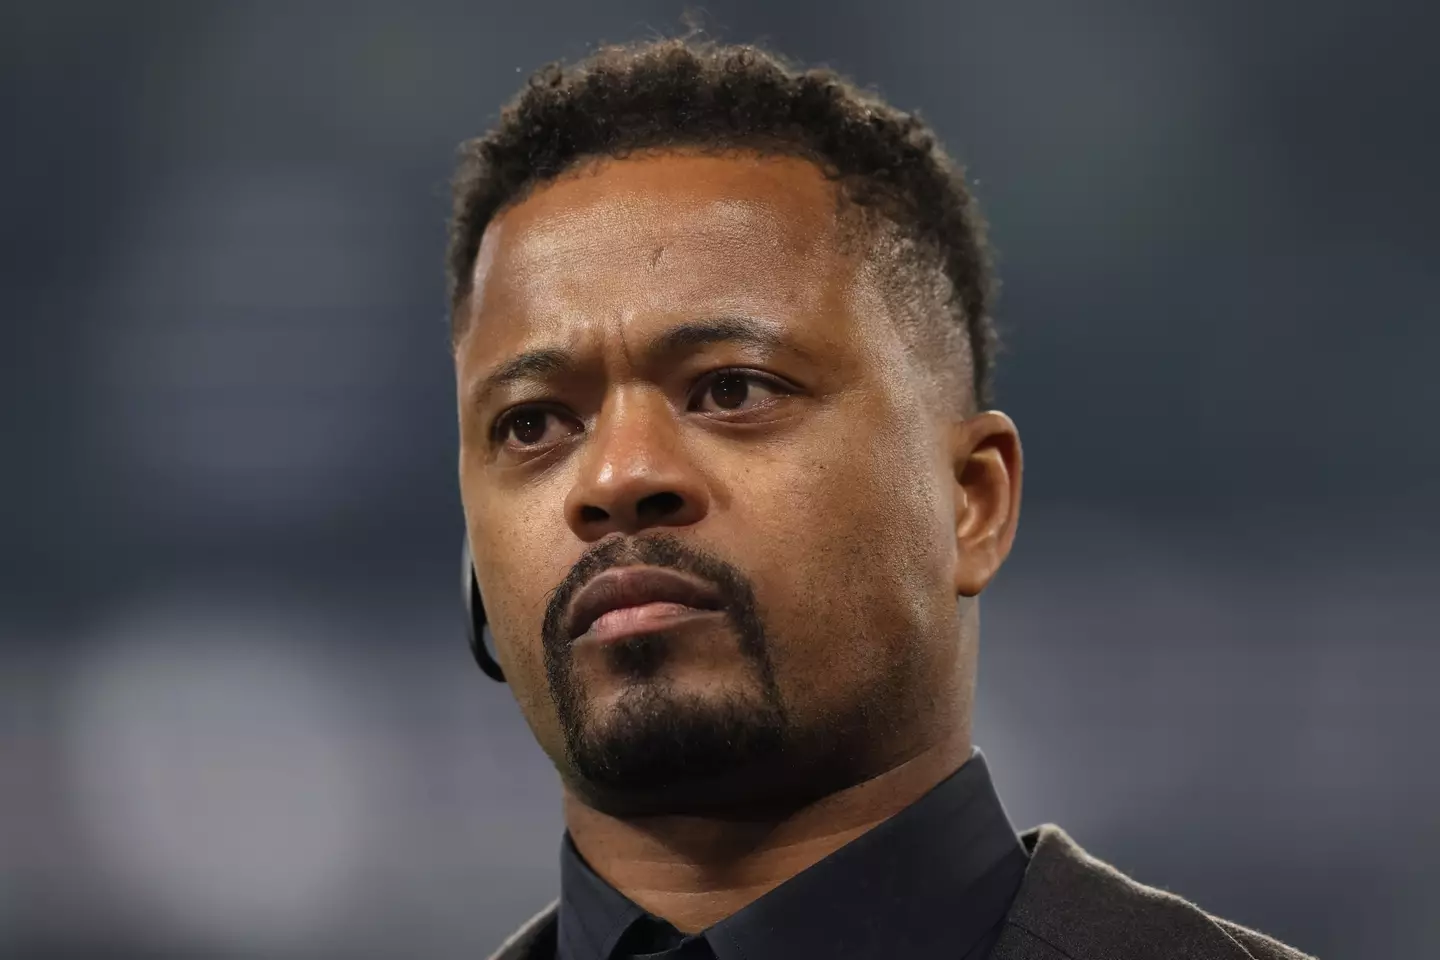 Former Manchester United defender Patrice Evra is also preparing for his boxing debut (Image: PA)